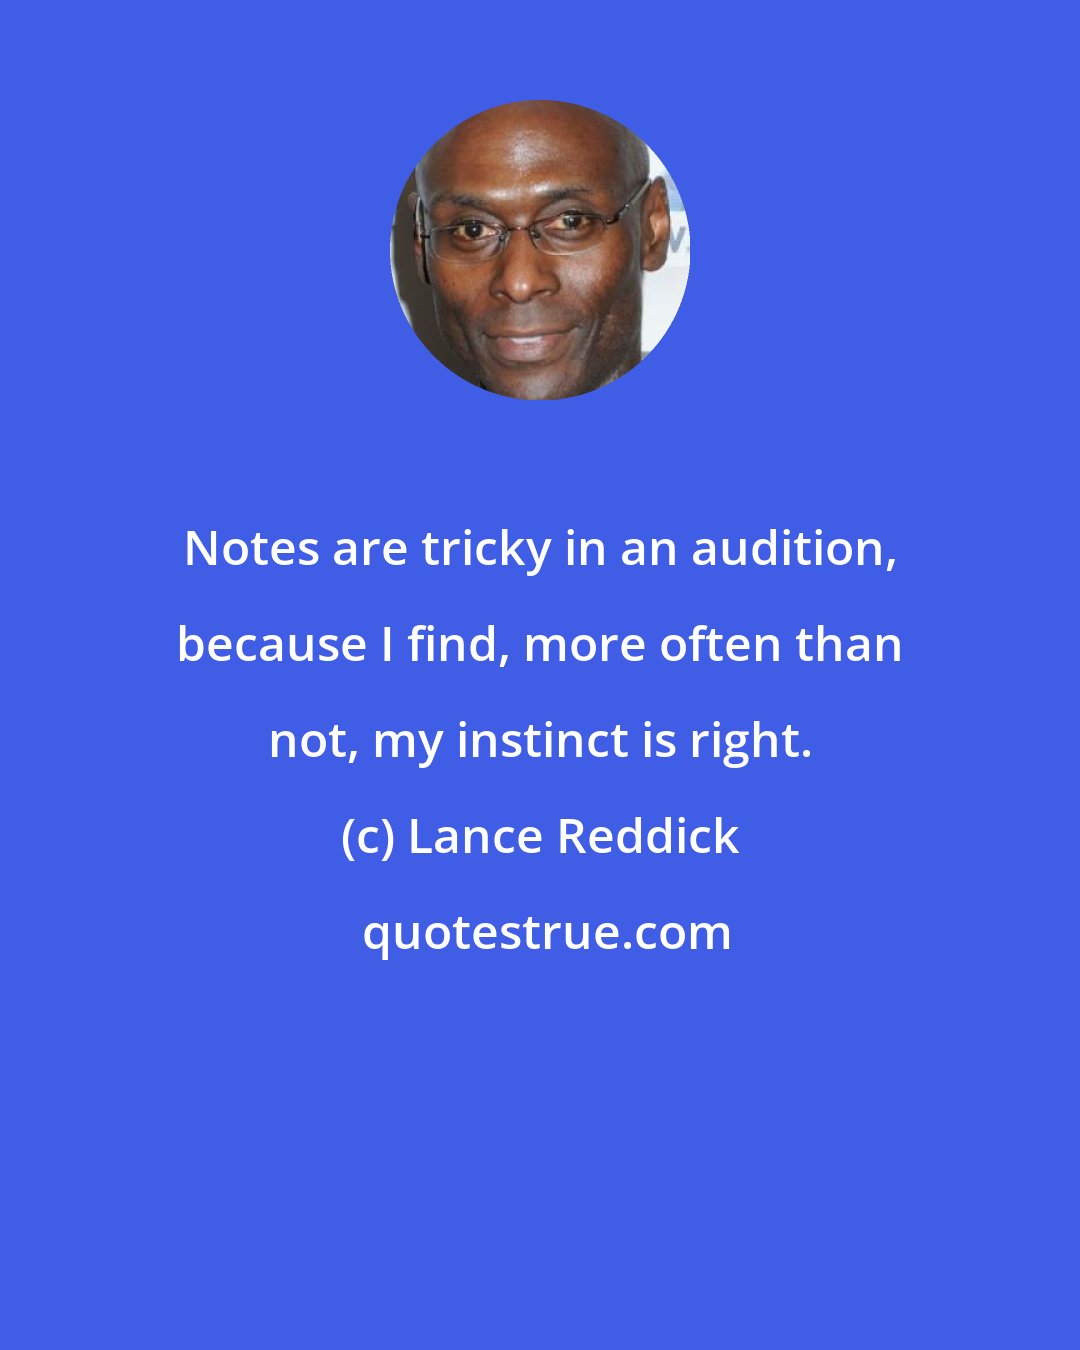 Lance Reddick: Notes are tricky in an audition, because I find, more often than not, my instinct is right.